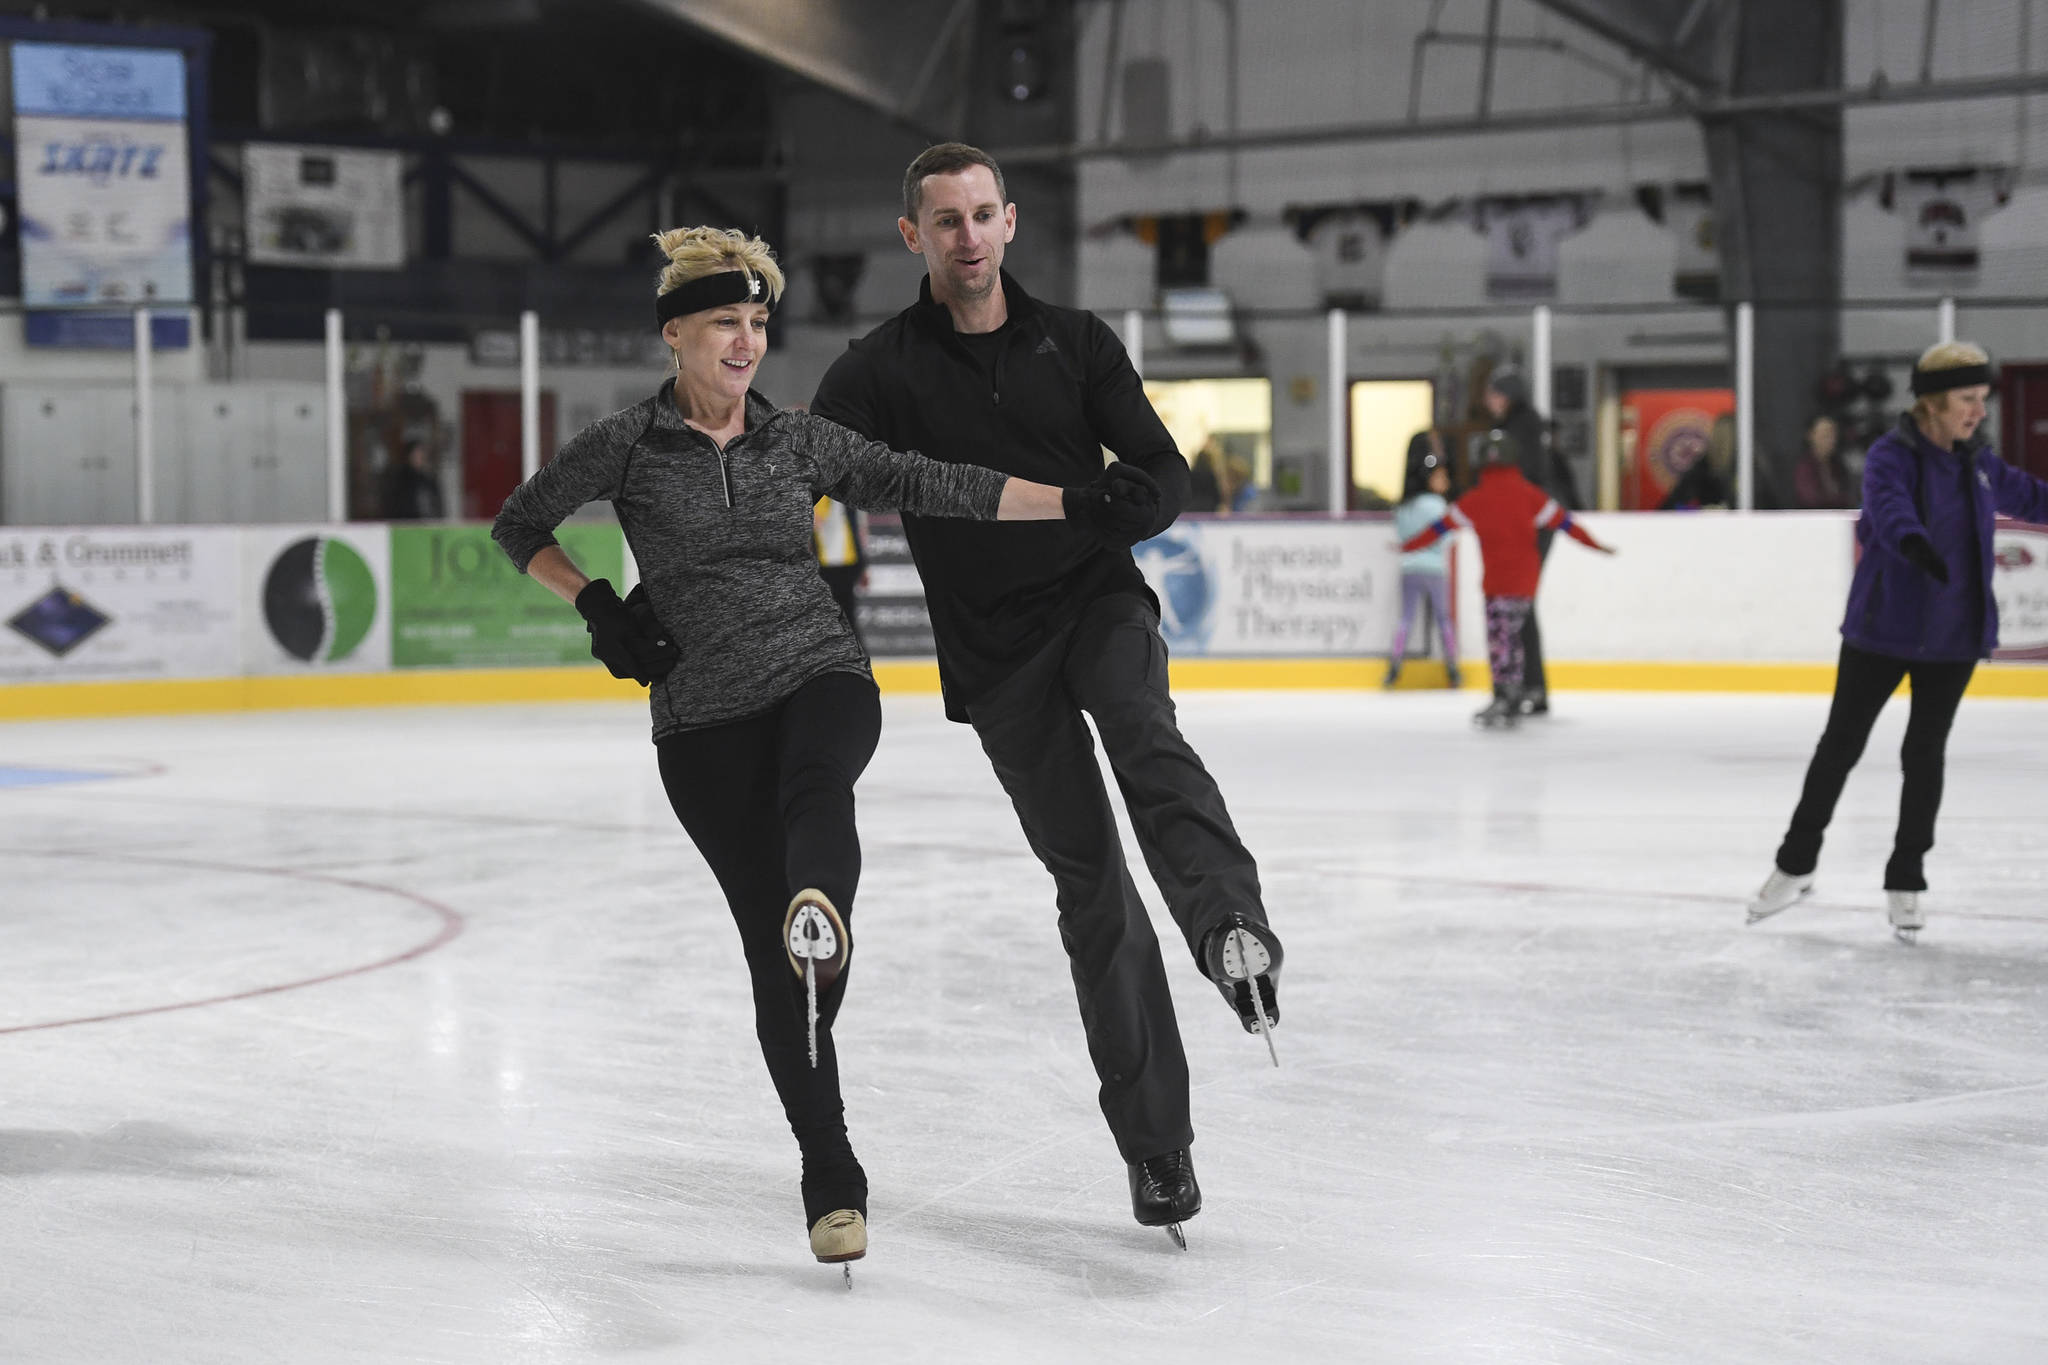 Wendy Buille and Ryan Kauzoarich practice their pair figure skating during a free skate on the opening day at the Treadwell Arena on Monday, Aug. 5, 2019. (Michael Penn | Juneau Empire)